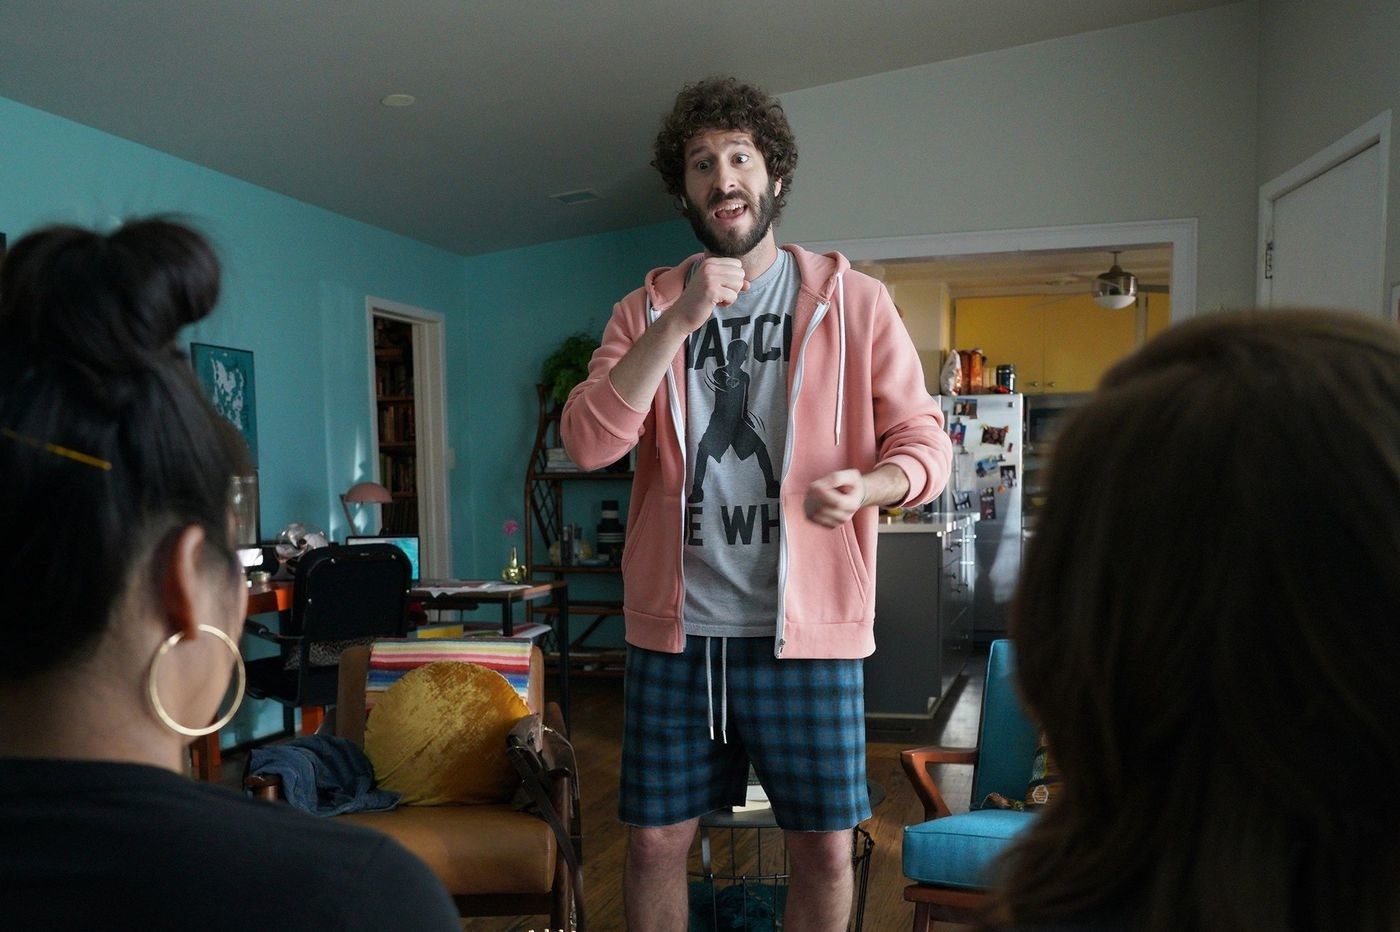 Rapper Lil Dicky AKA Dave is on a mission to become the best rapper in hist...